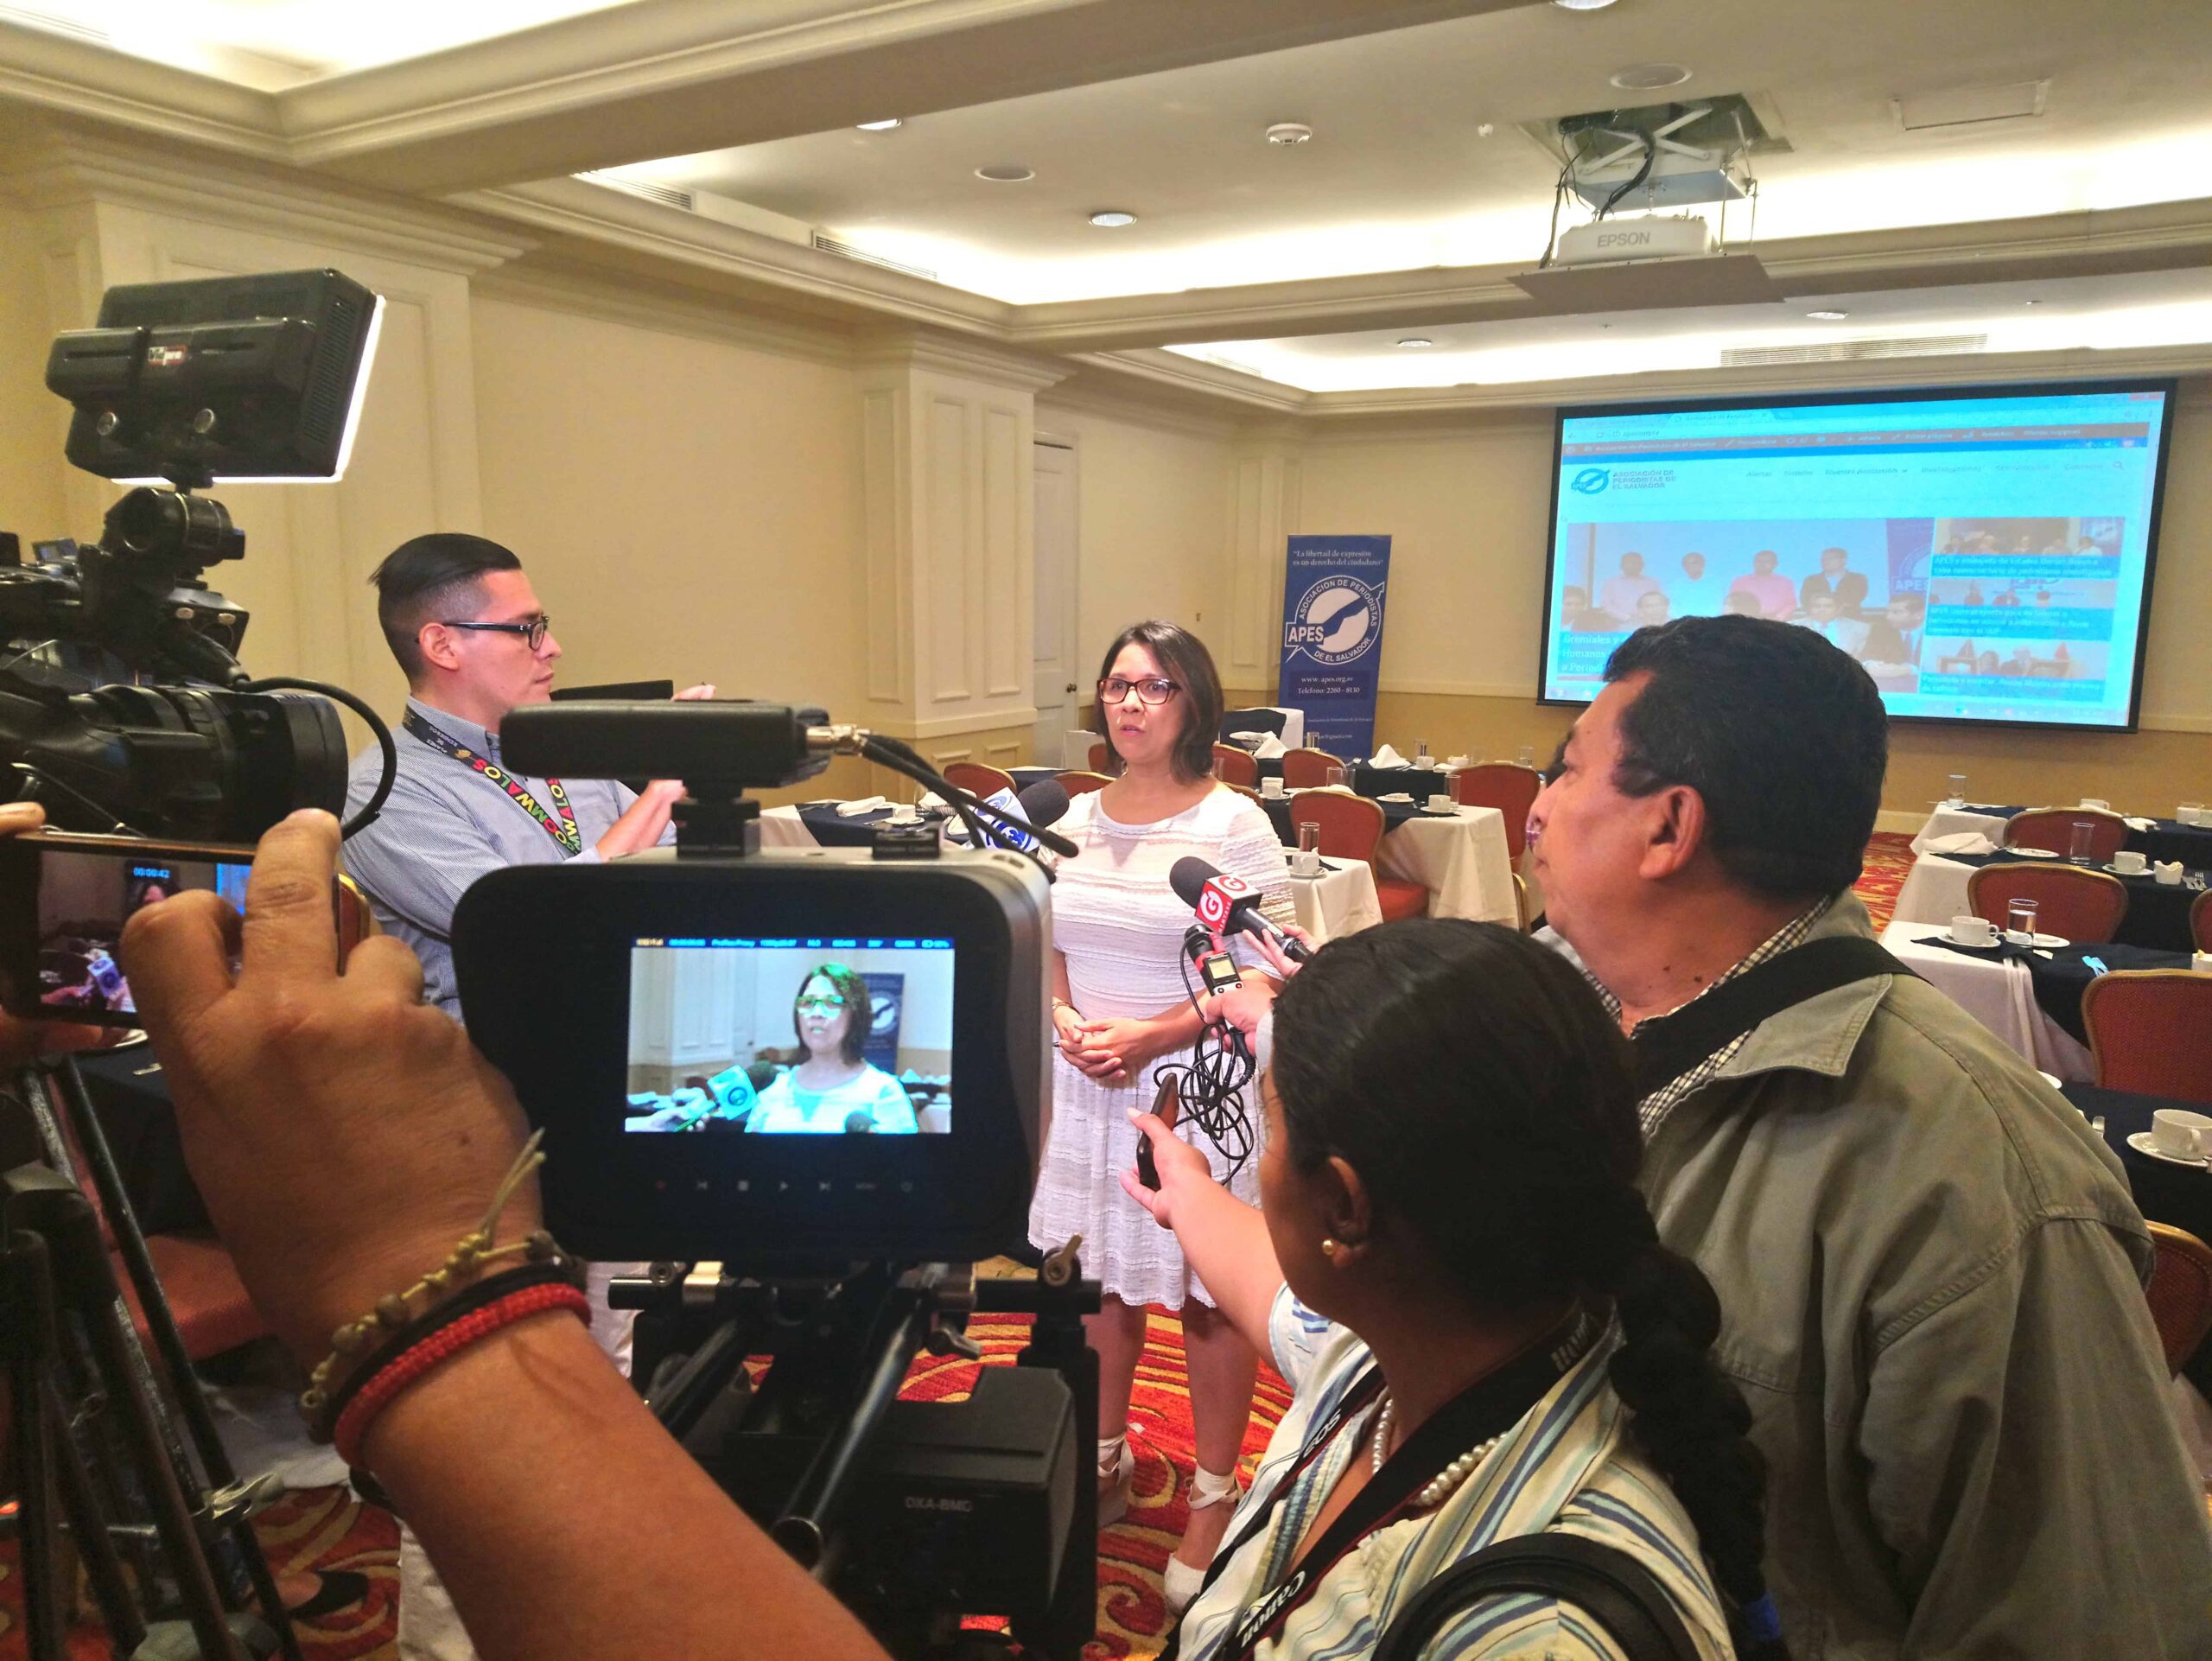 A group of journalists interviews a woman (Dalila Arriaza) using video cameras and microphones.